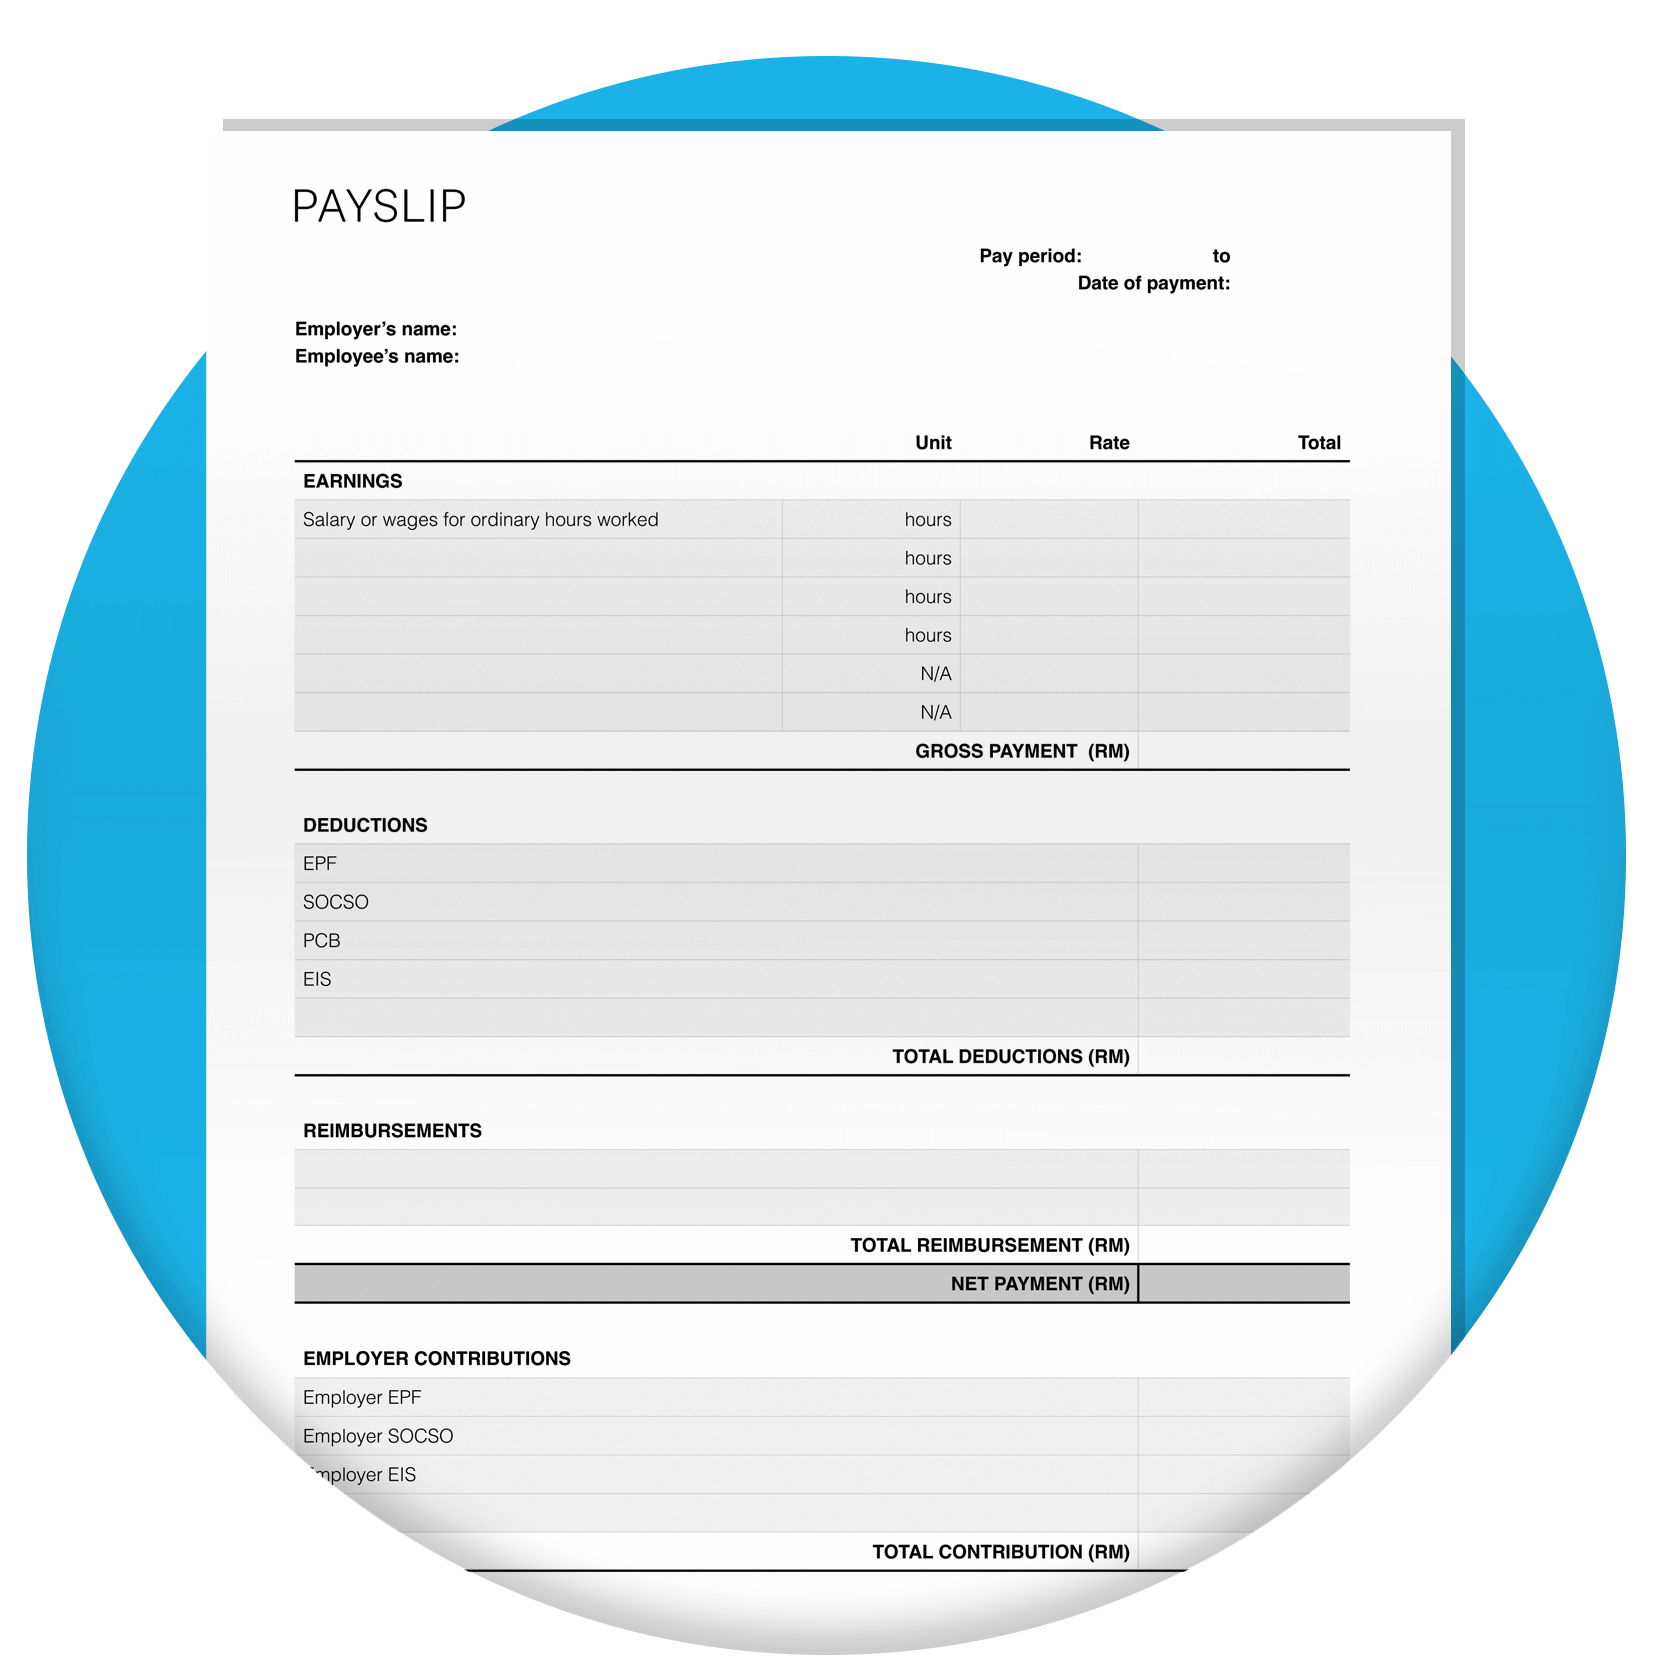 Payslip template with blank fields for users to fill out.